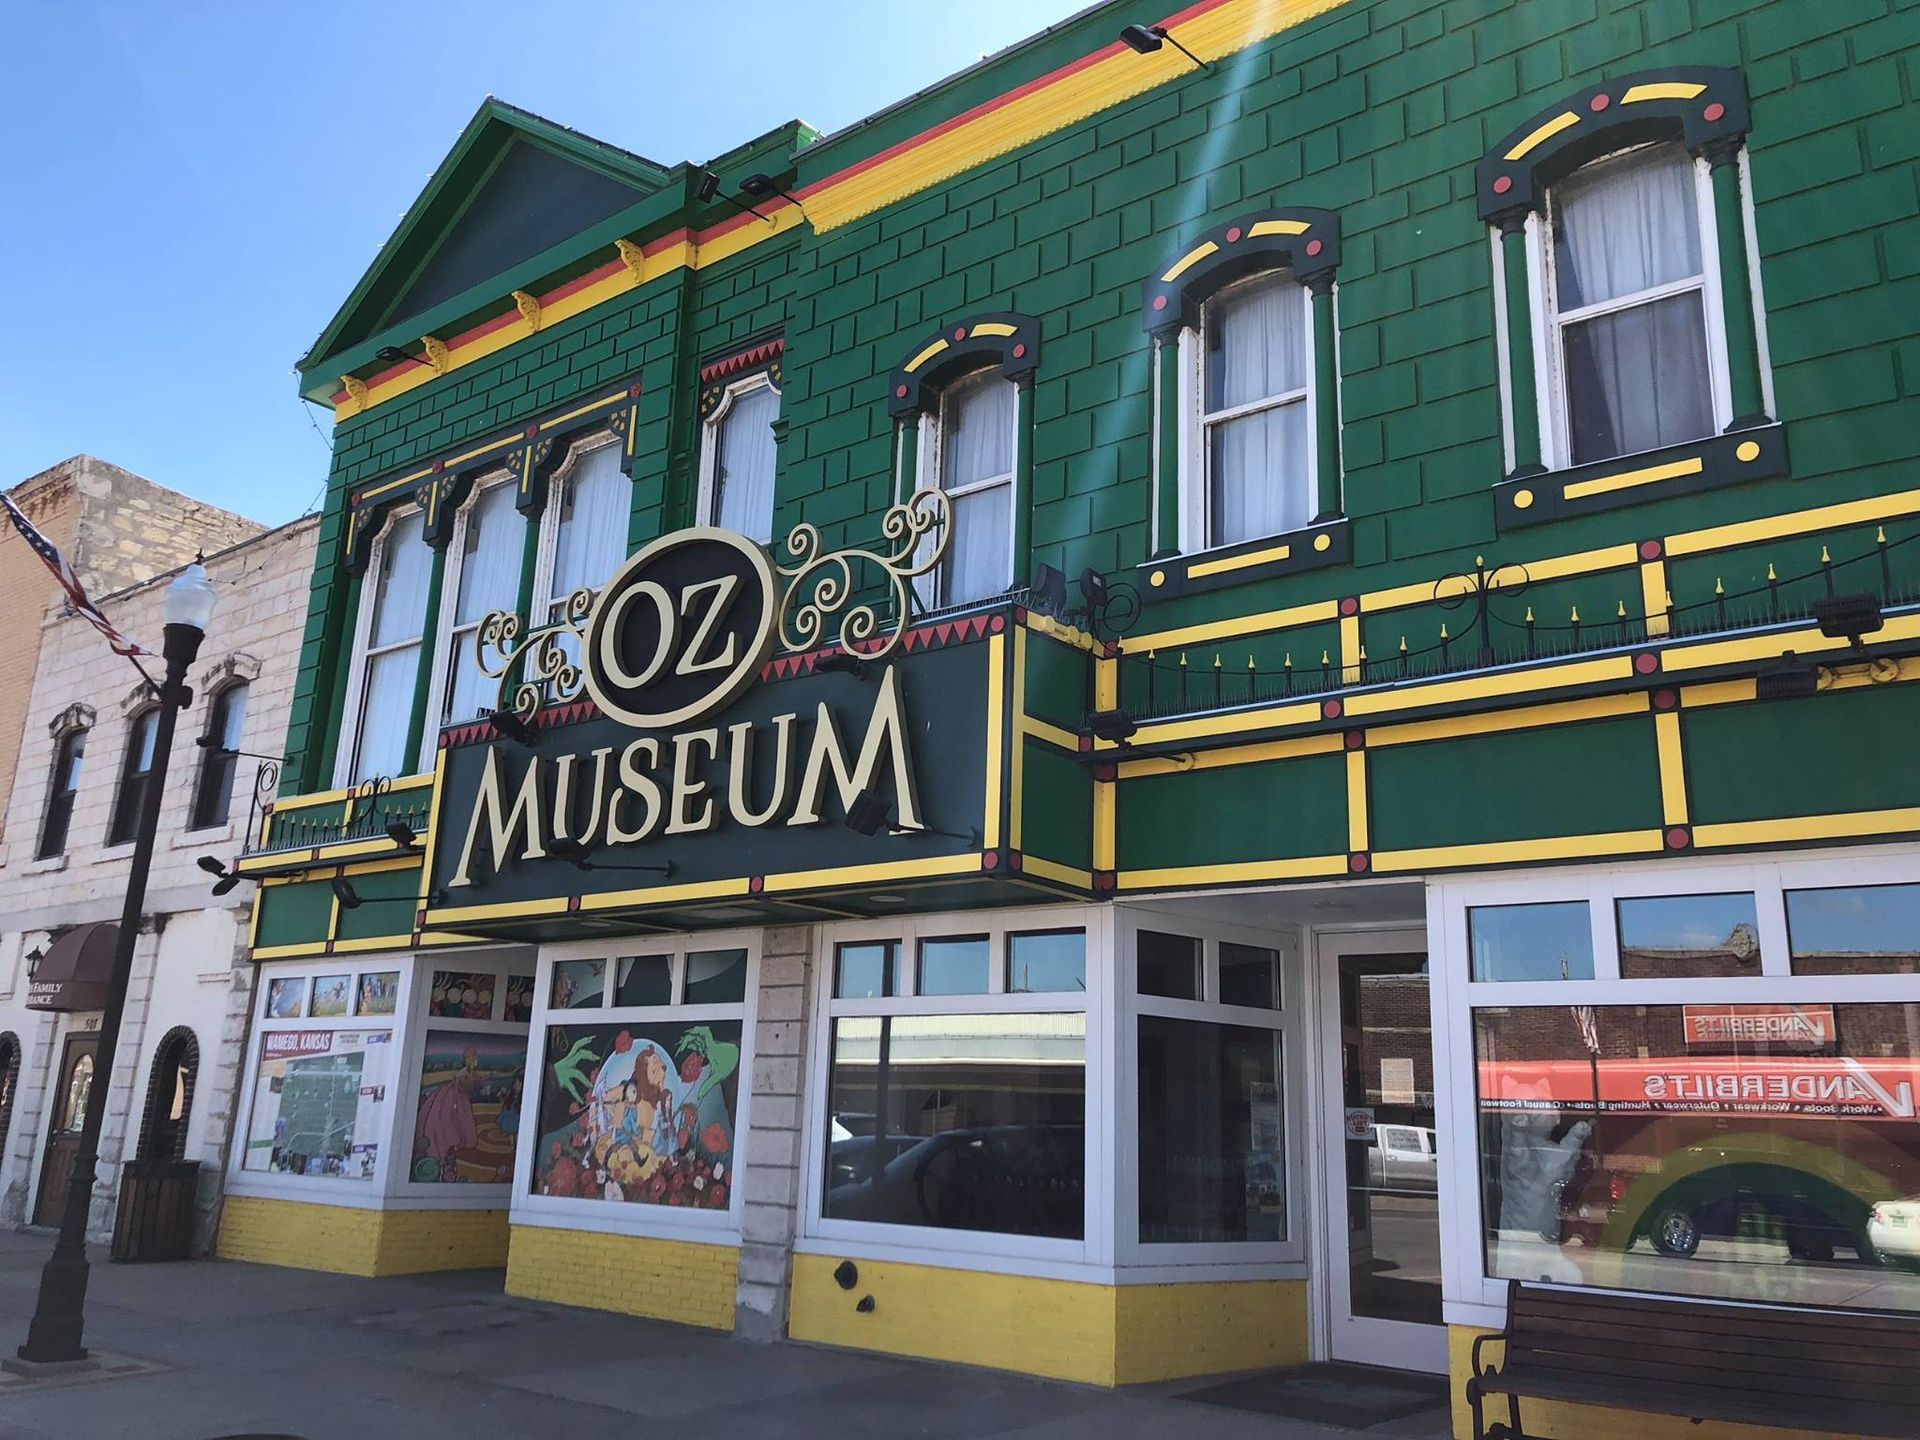 World’s Largest Collection of Oz Memorabilia: world record in Wamego, Kansas